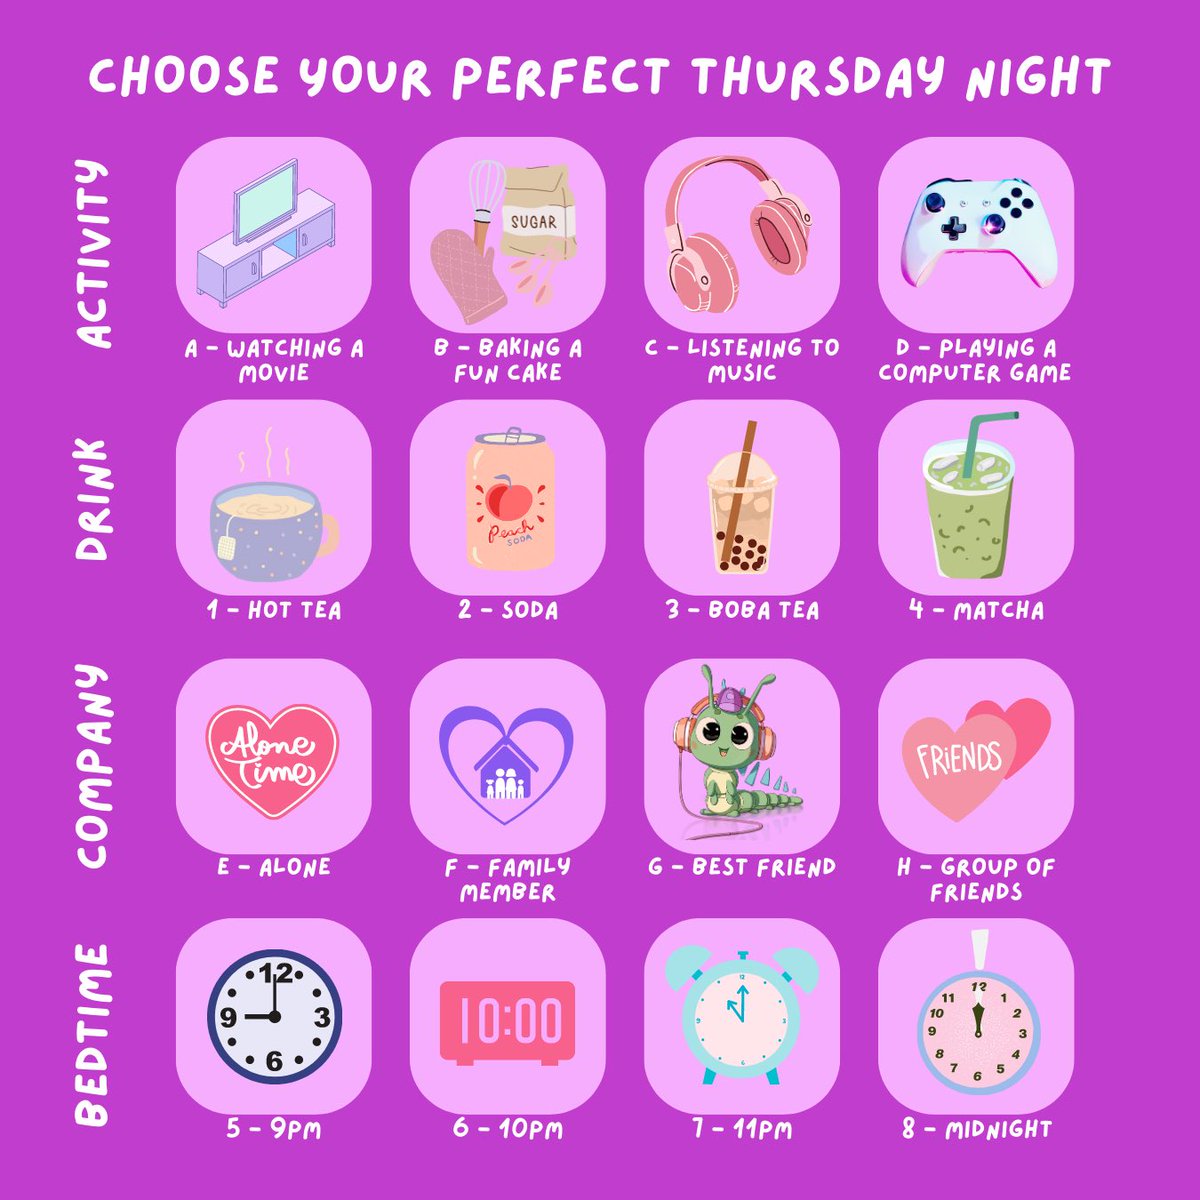 thursdays are for self care and fun🫶💕 pick and choose your night with us!! comment your choices below🐛 

#lofi #lofibeats #chillmusic #chillcaterpillar #relaxingbeats #chillbeats #lofiplaylist #thursday #pickyourown